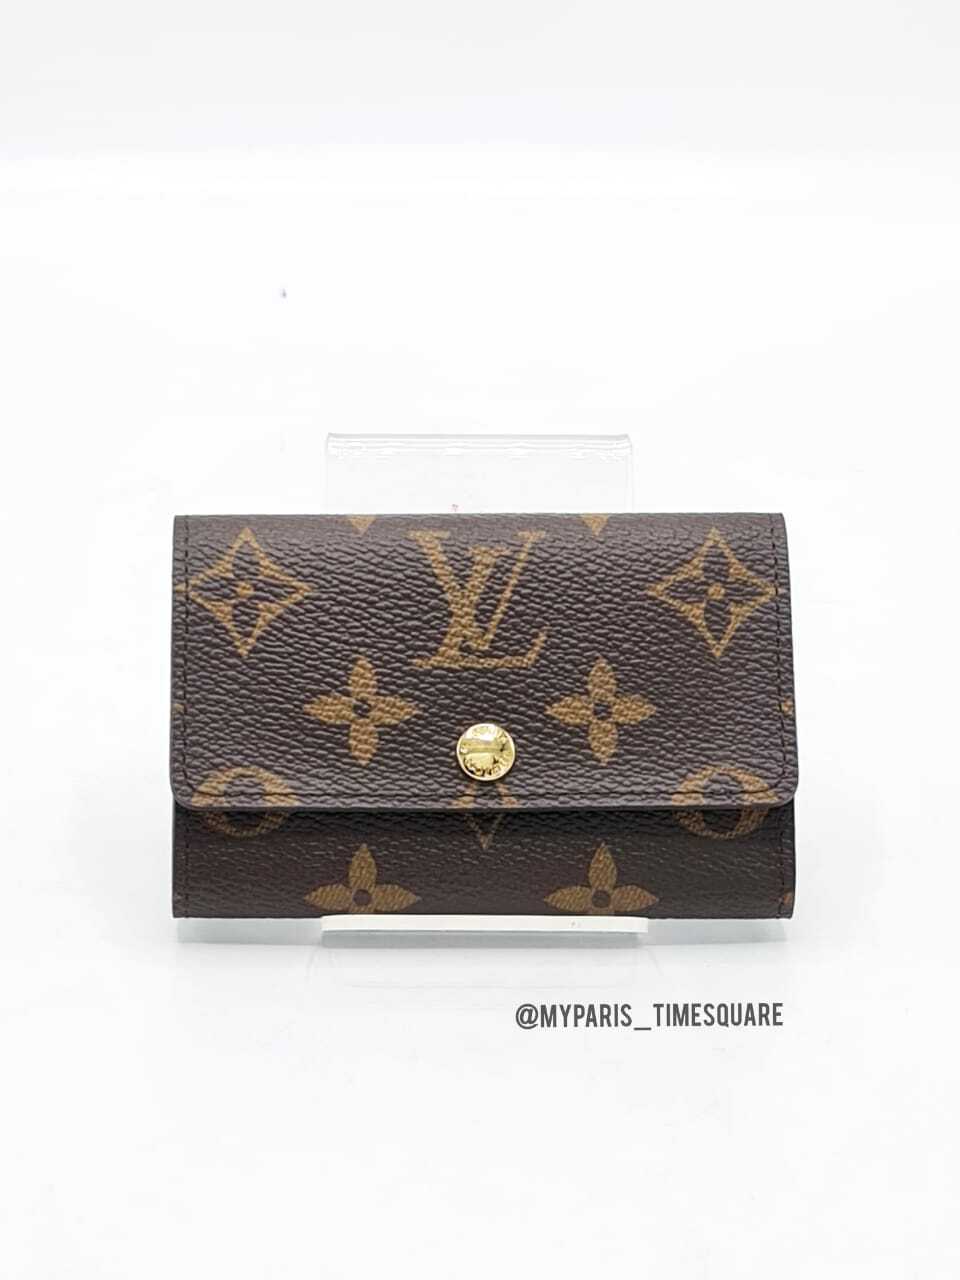 Key holder and cover are in my  storefront and the LV key